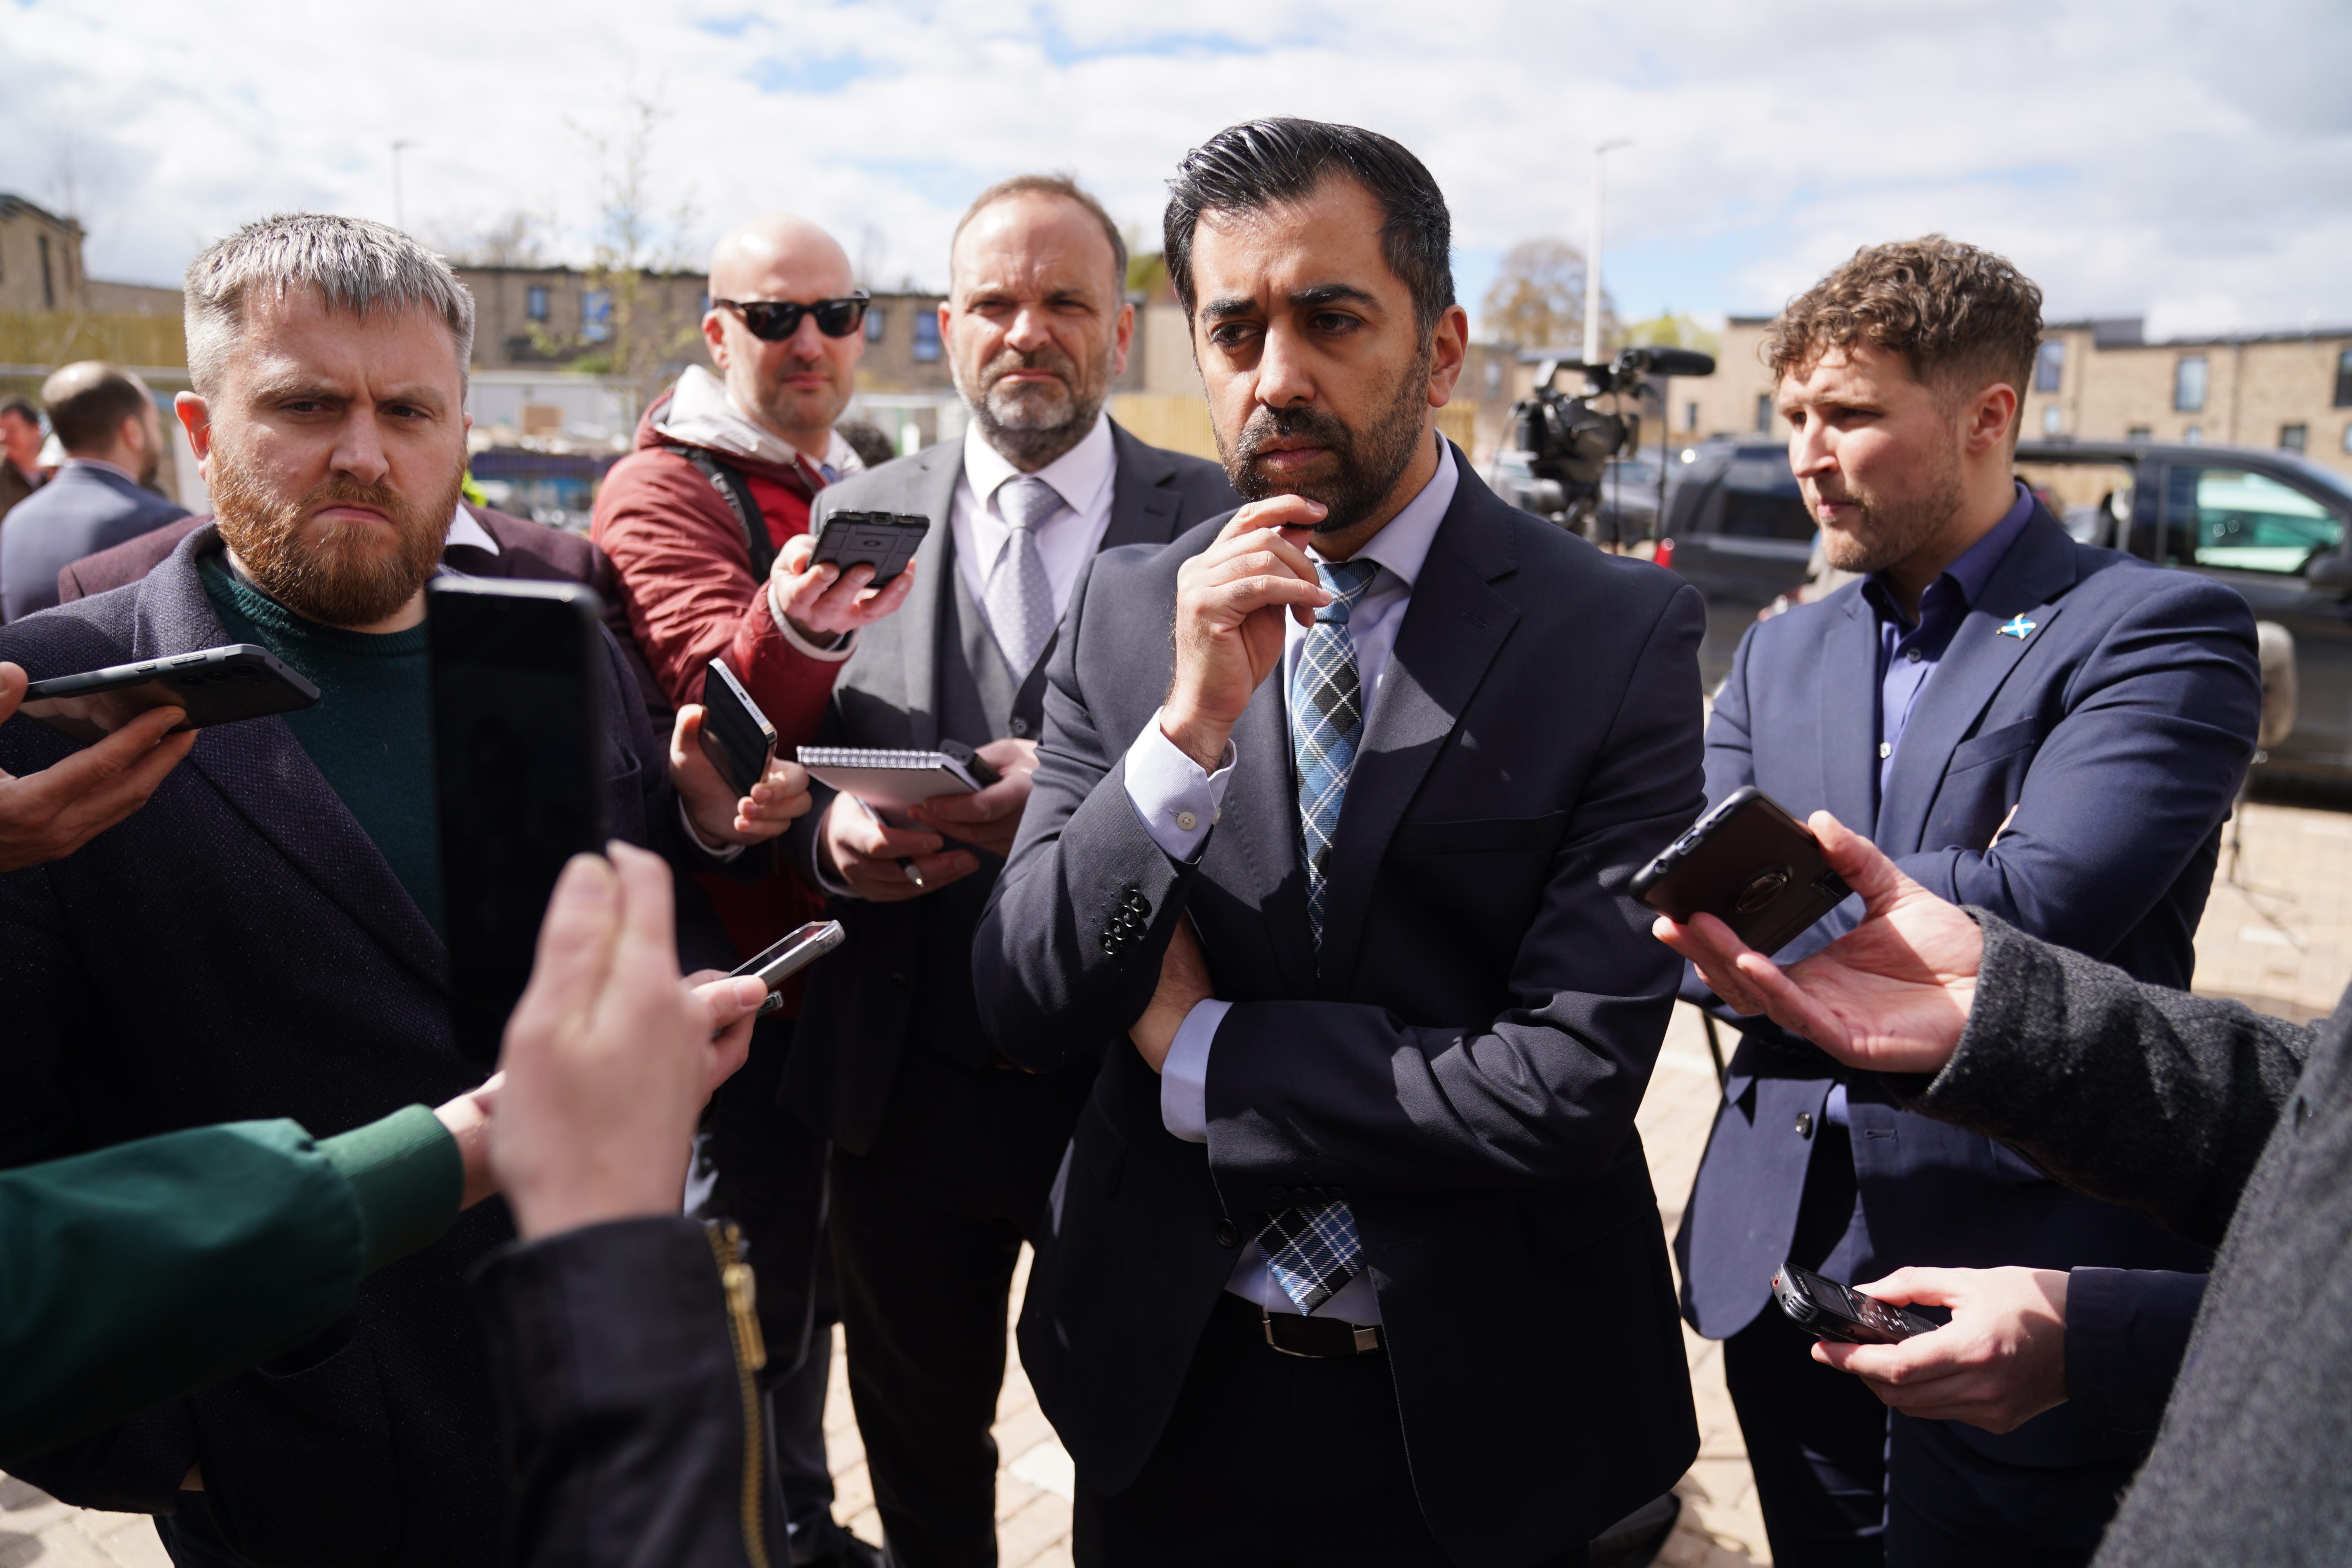 Humza Yousaf said he would not rule out an early Holyrood election